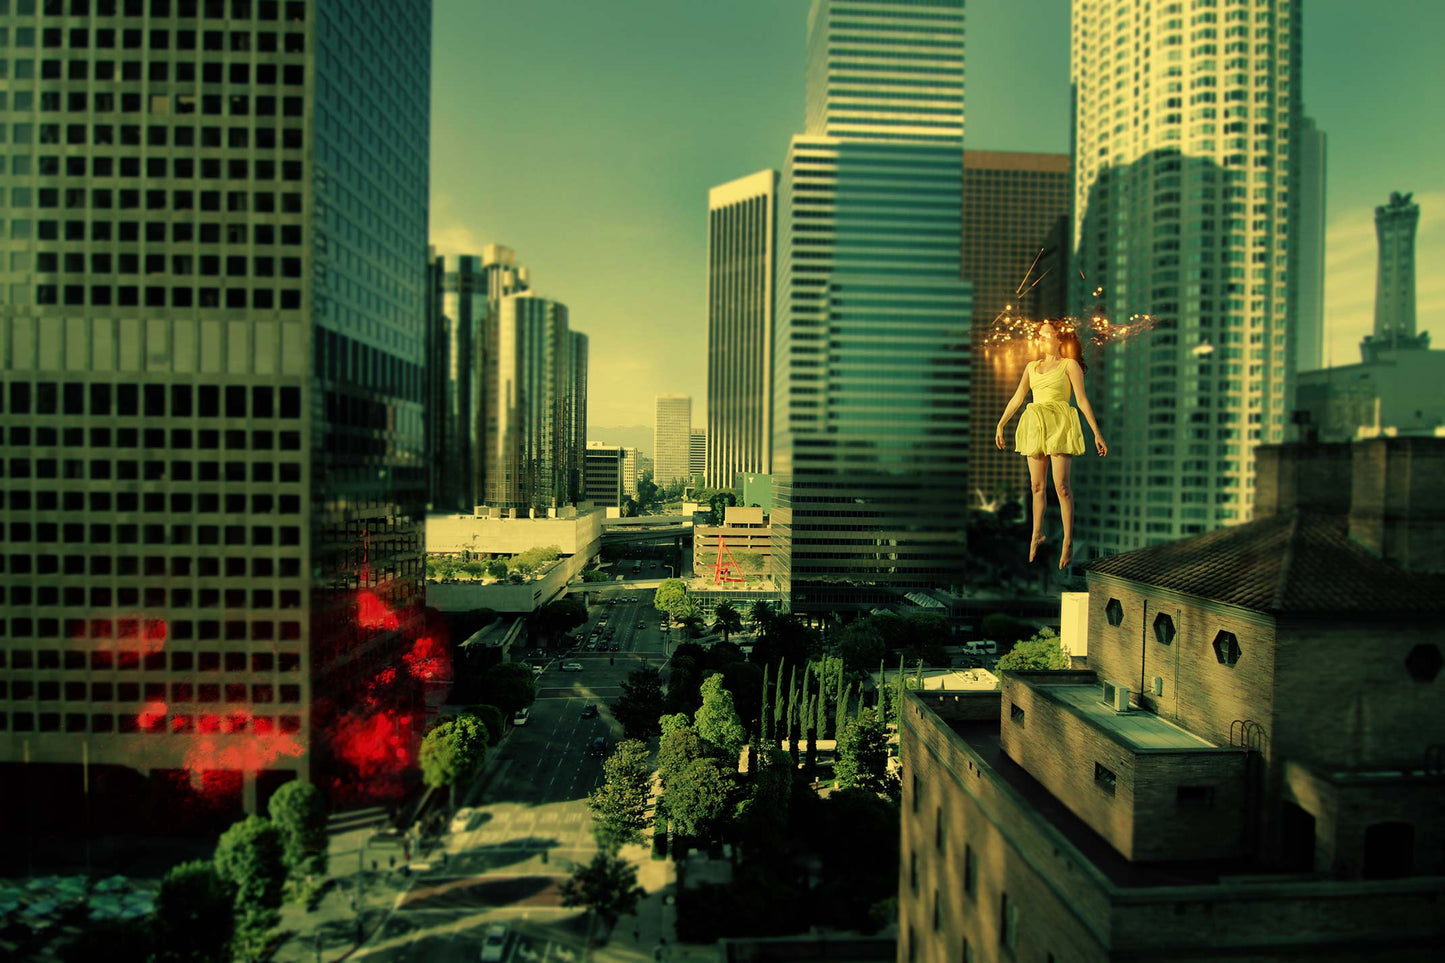 "Light Theory #2," is fine art photograph that showcases a surreal digital collage of a woman suspended in mid-air above downtown Los Angeles. This composition combines tones of green and yellow to create a dreamlike atmosphere where the architecture of the cityscape becomes an integral part of the narrative. Sparks of light punctuate the scene, infusing it with a sense of magic and intrigue.